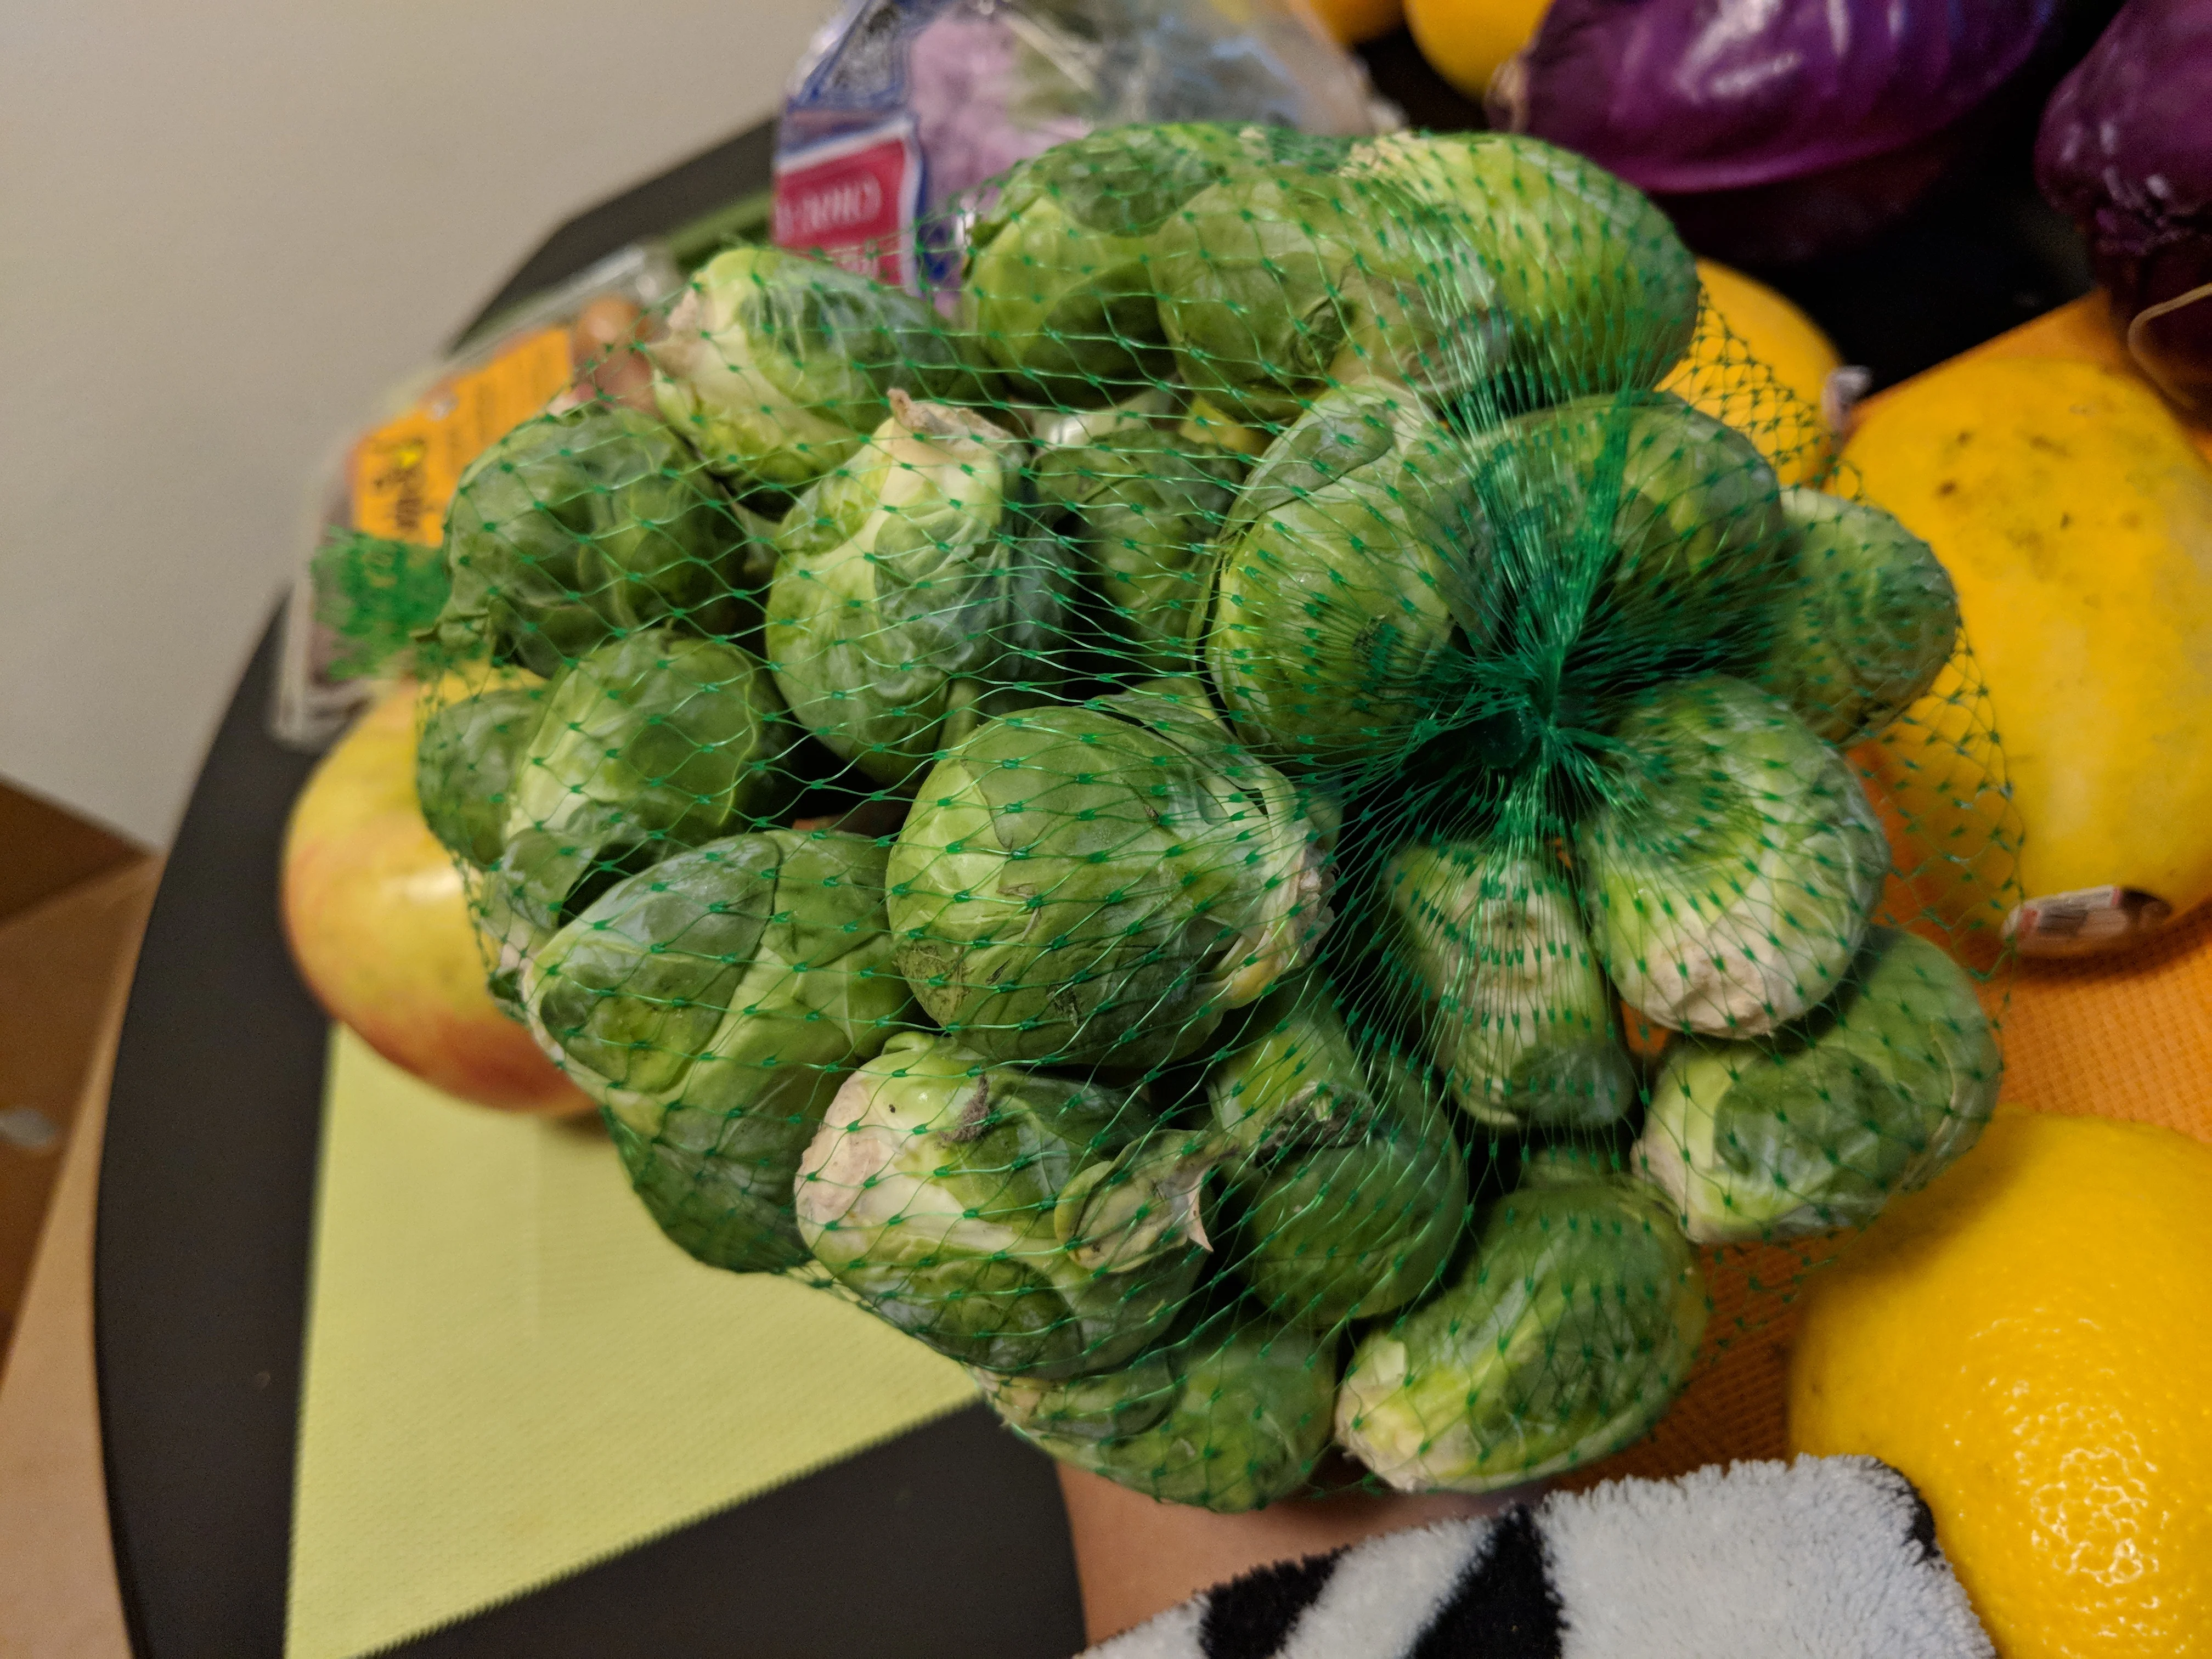 Imperfect Produce Box Review and Reveal - Brussel Sprouts